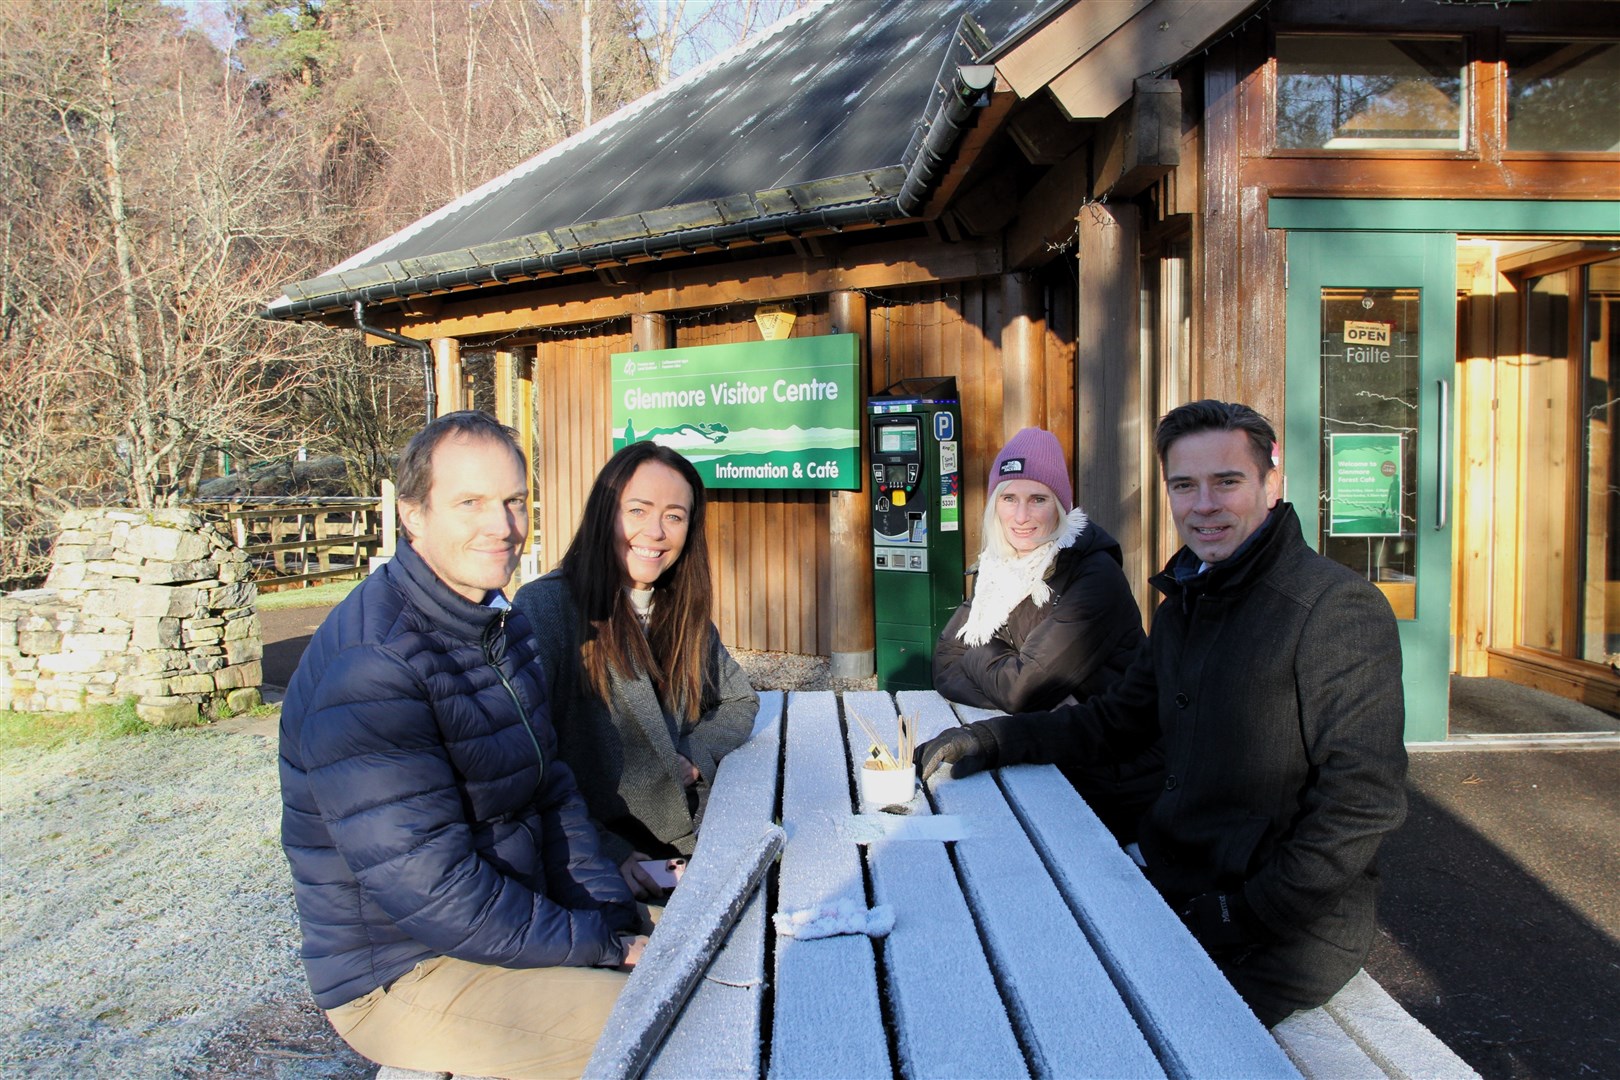 ACGT leaders Mike Dearman, Lee Bissett, Kirsty Bruce and Duncan Swarbrick outside of the Glenmore Visitor Centre.